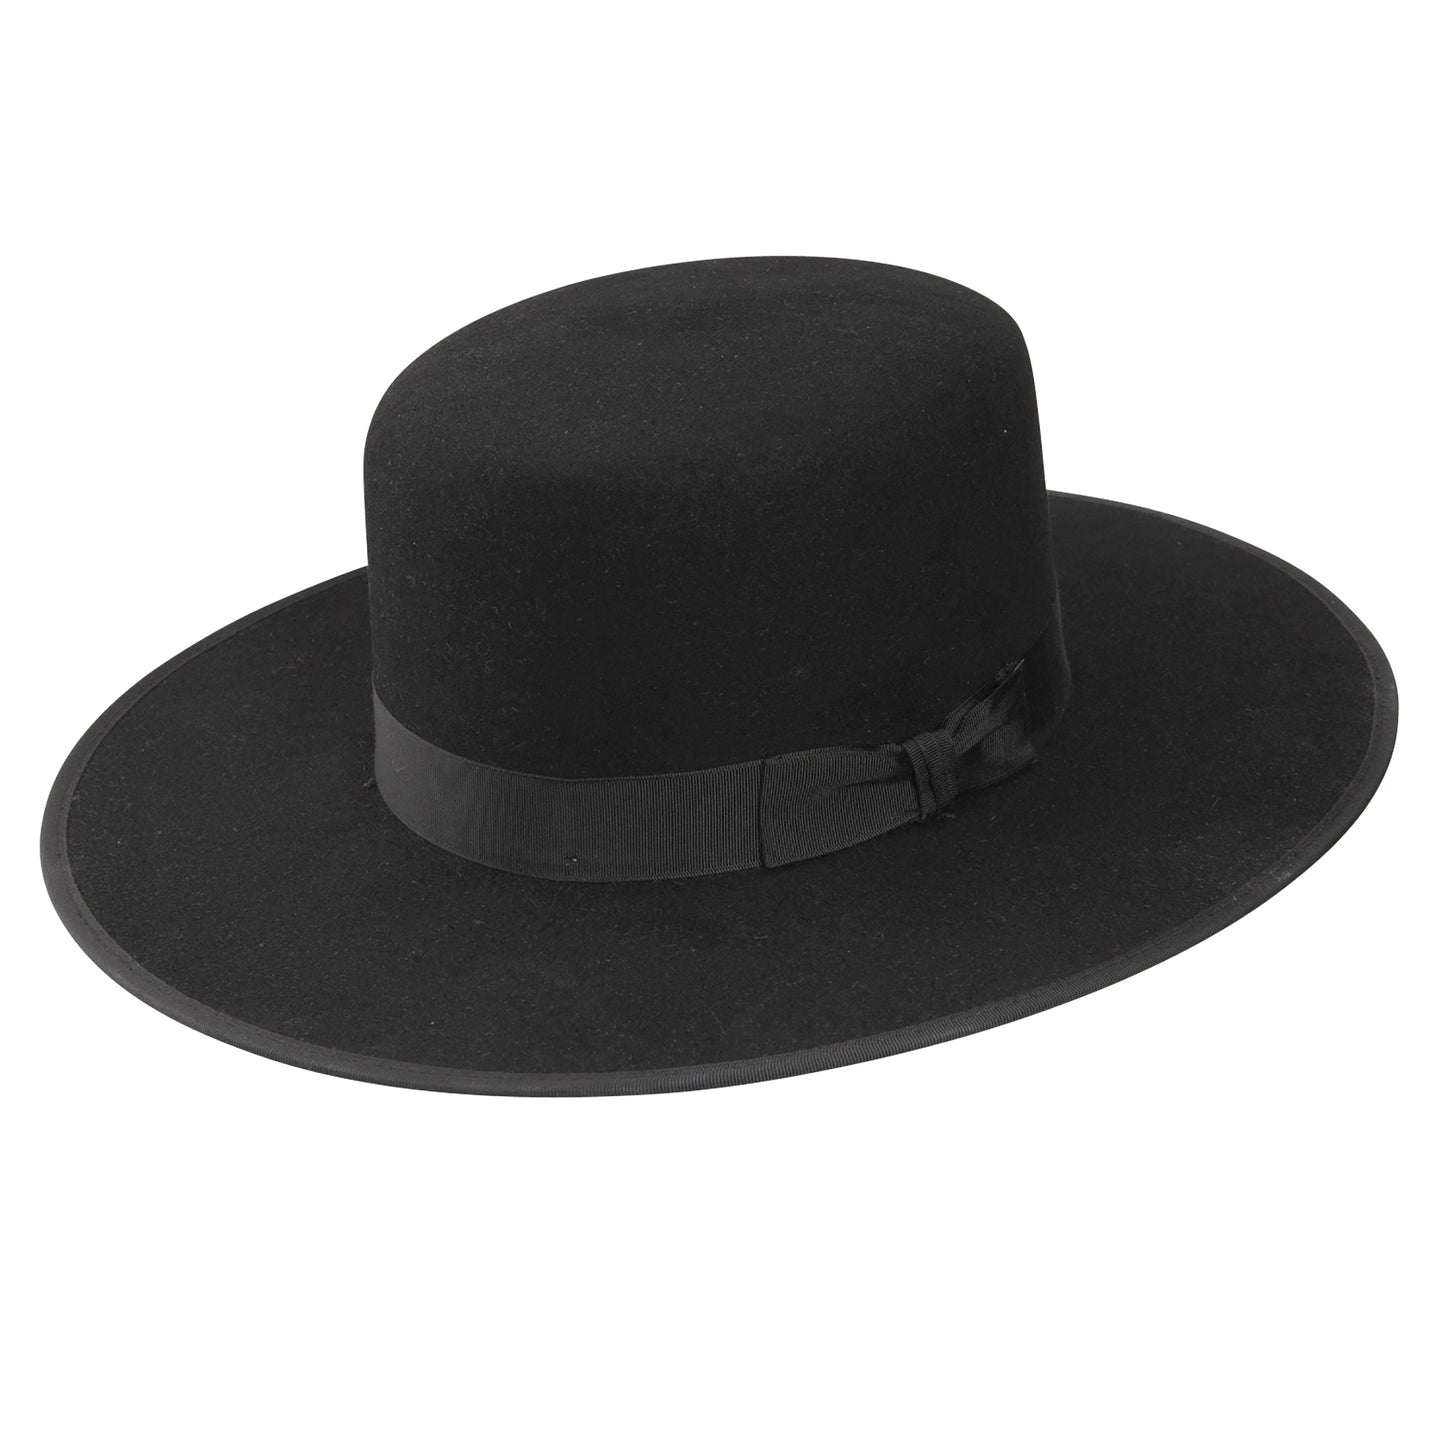 Black, wide brimmed hat made of wool felt. It features a black ribbon around the crown.